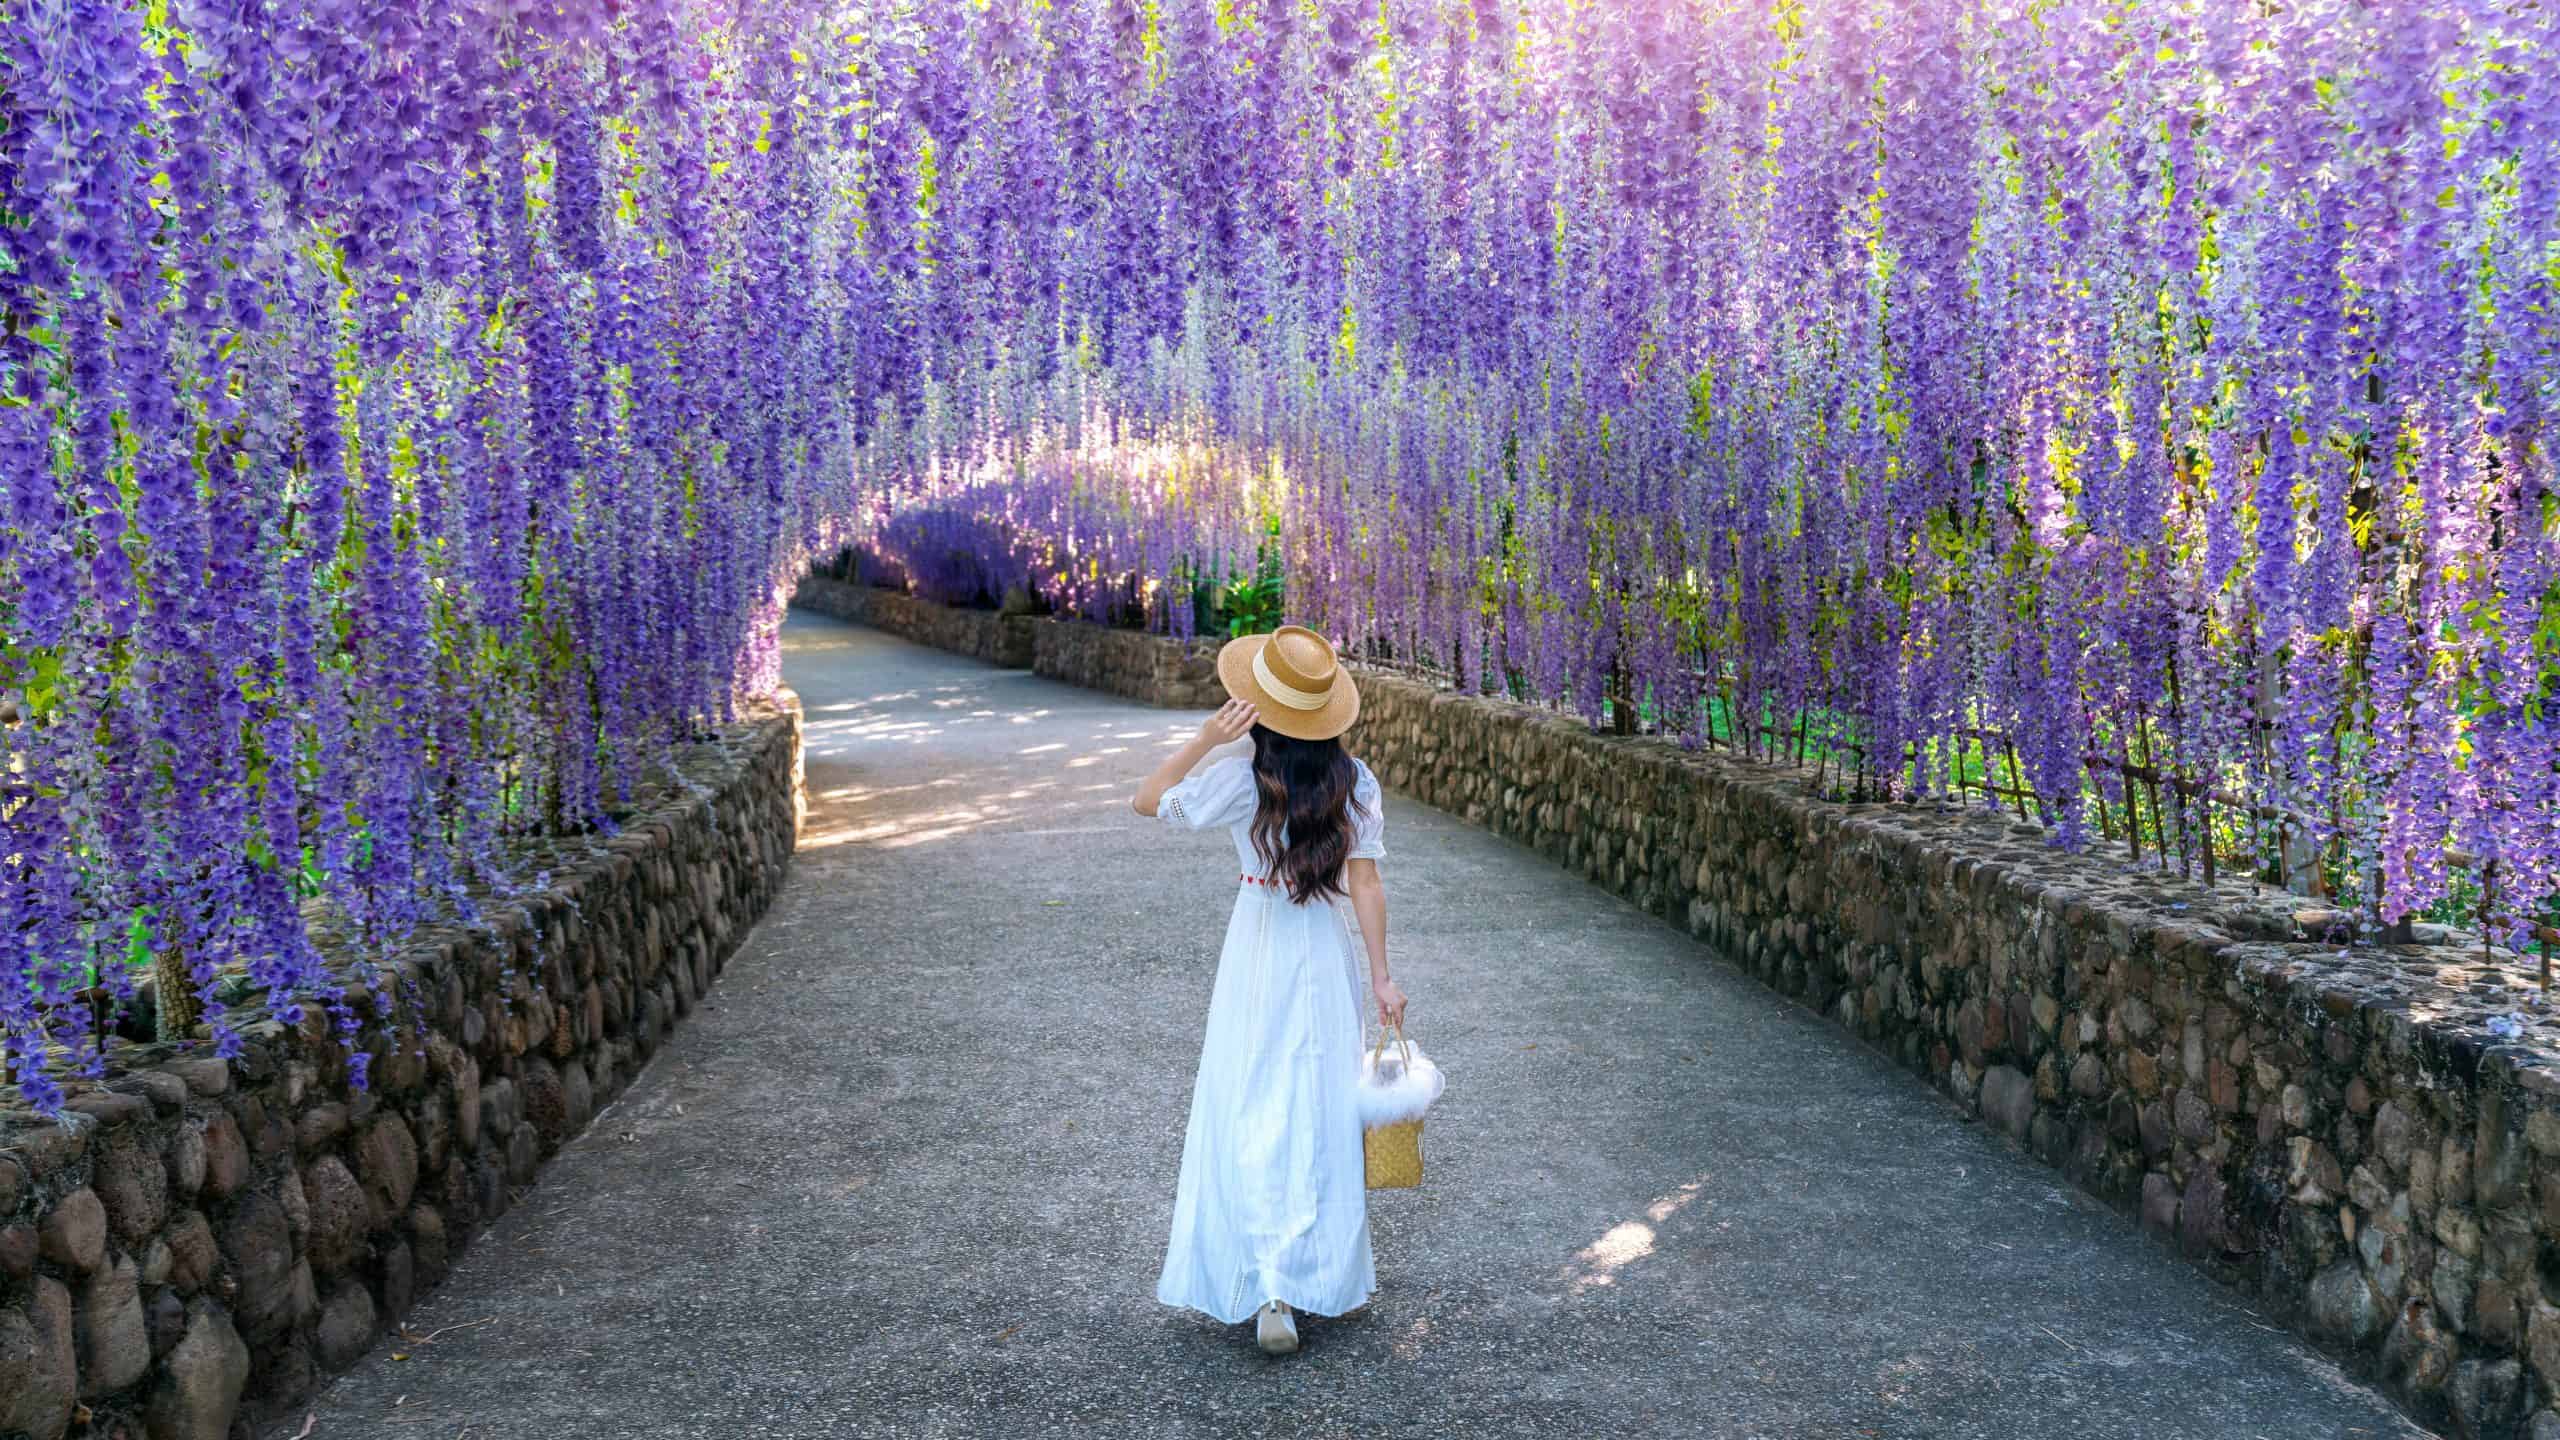 After canola, sunflowers and poppies, it’s time for wisteria! This plant is making waves on Instagram